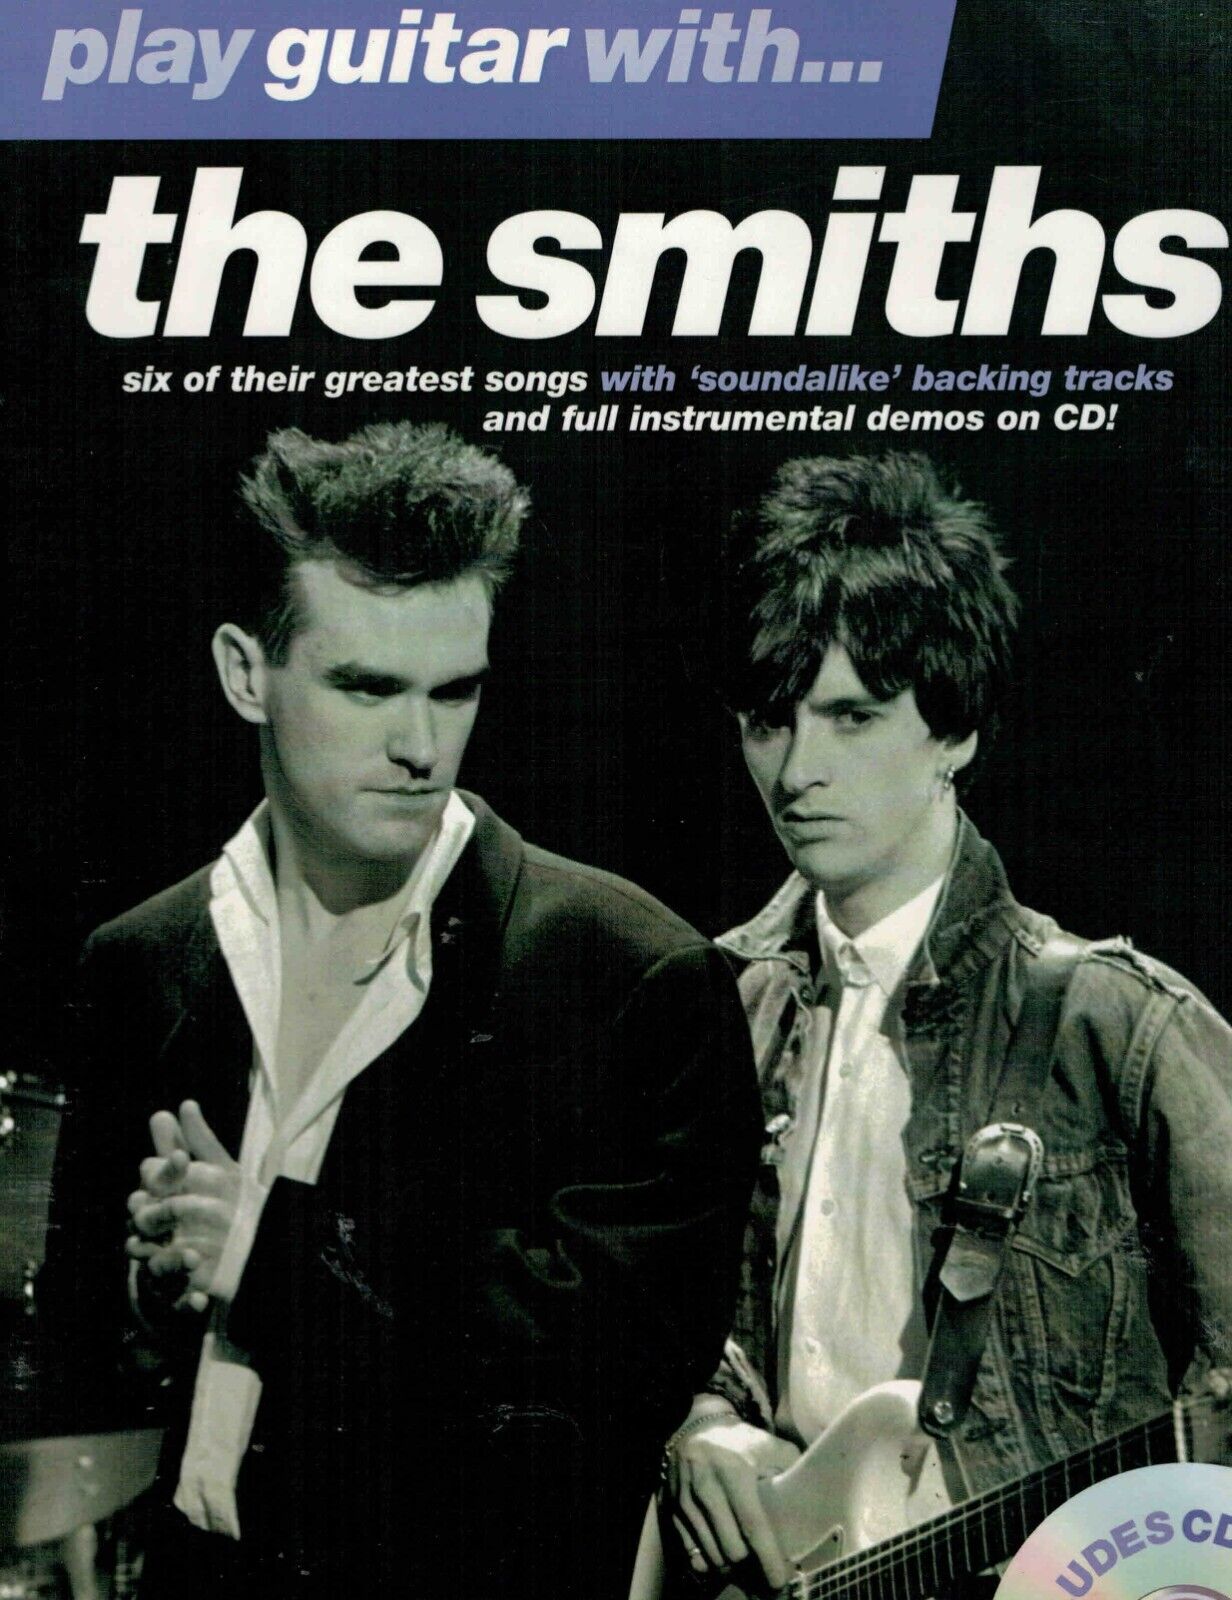 RARE:  PLAY GUITAR with....THE SMITHS  --- COMES WITH A CD, FULLY INTACT - 2005